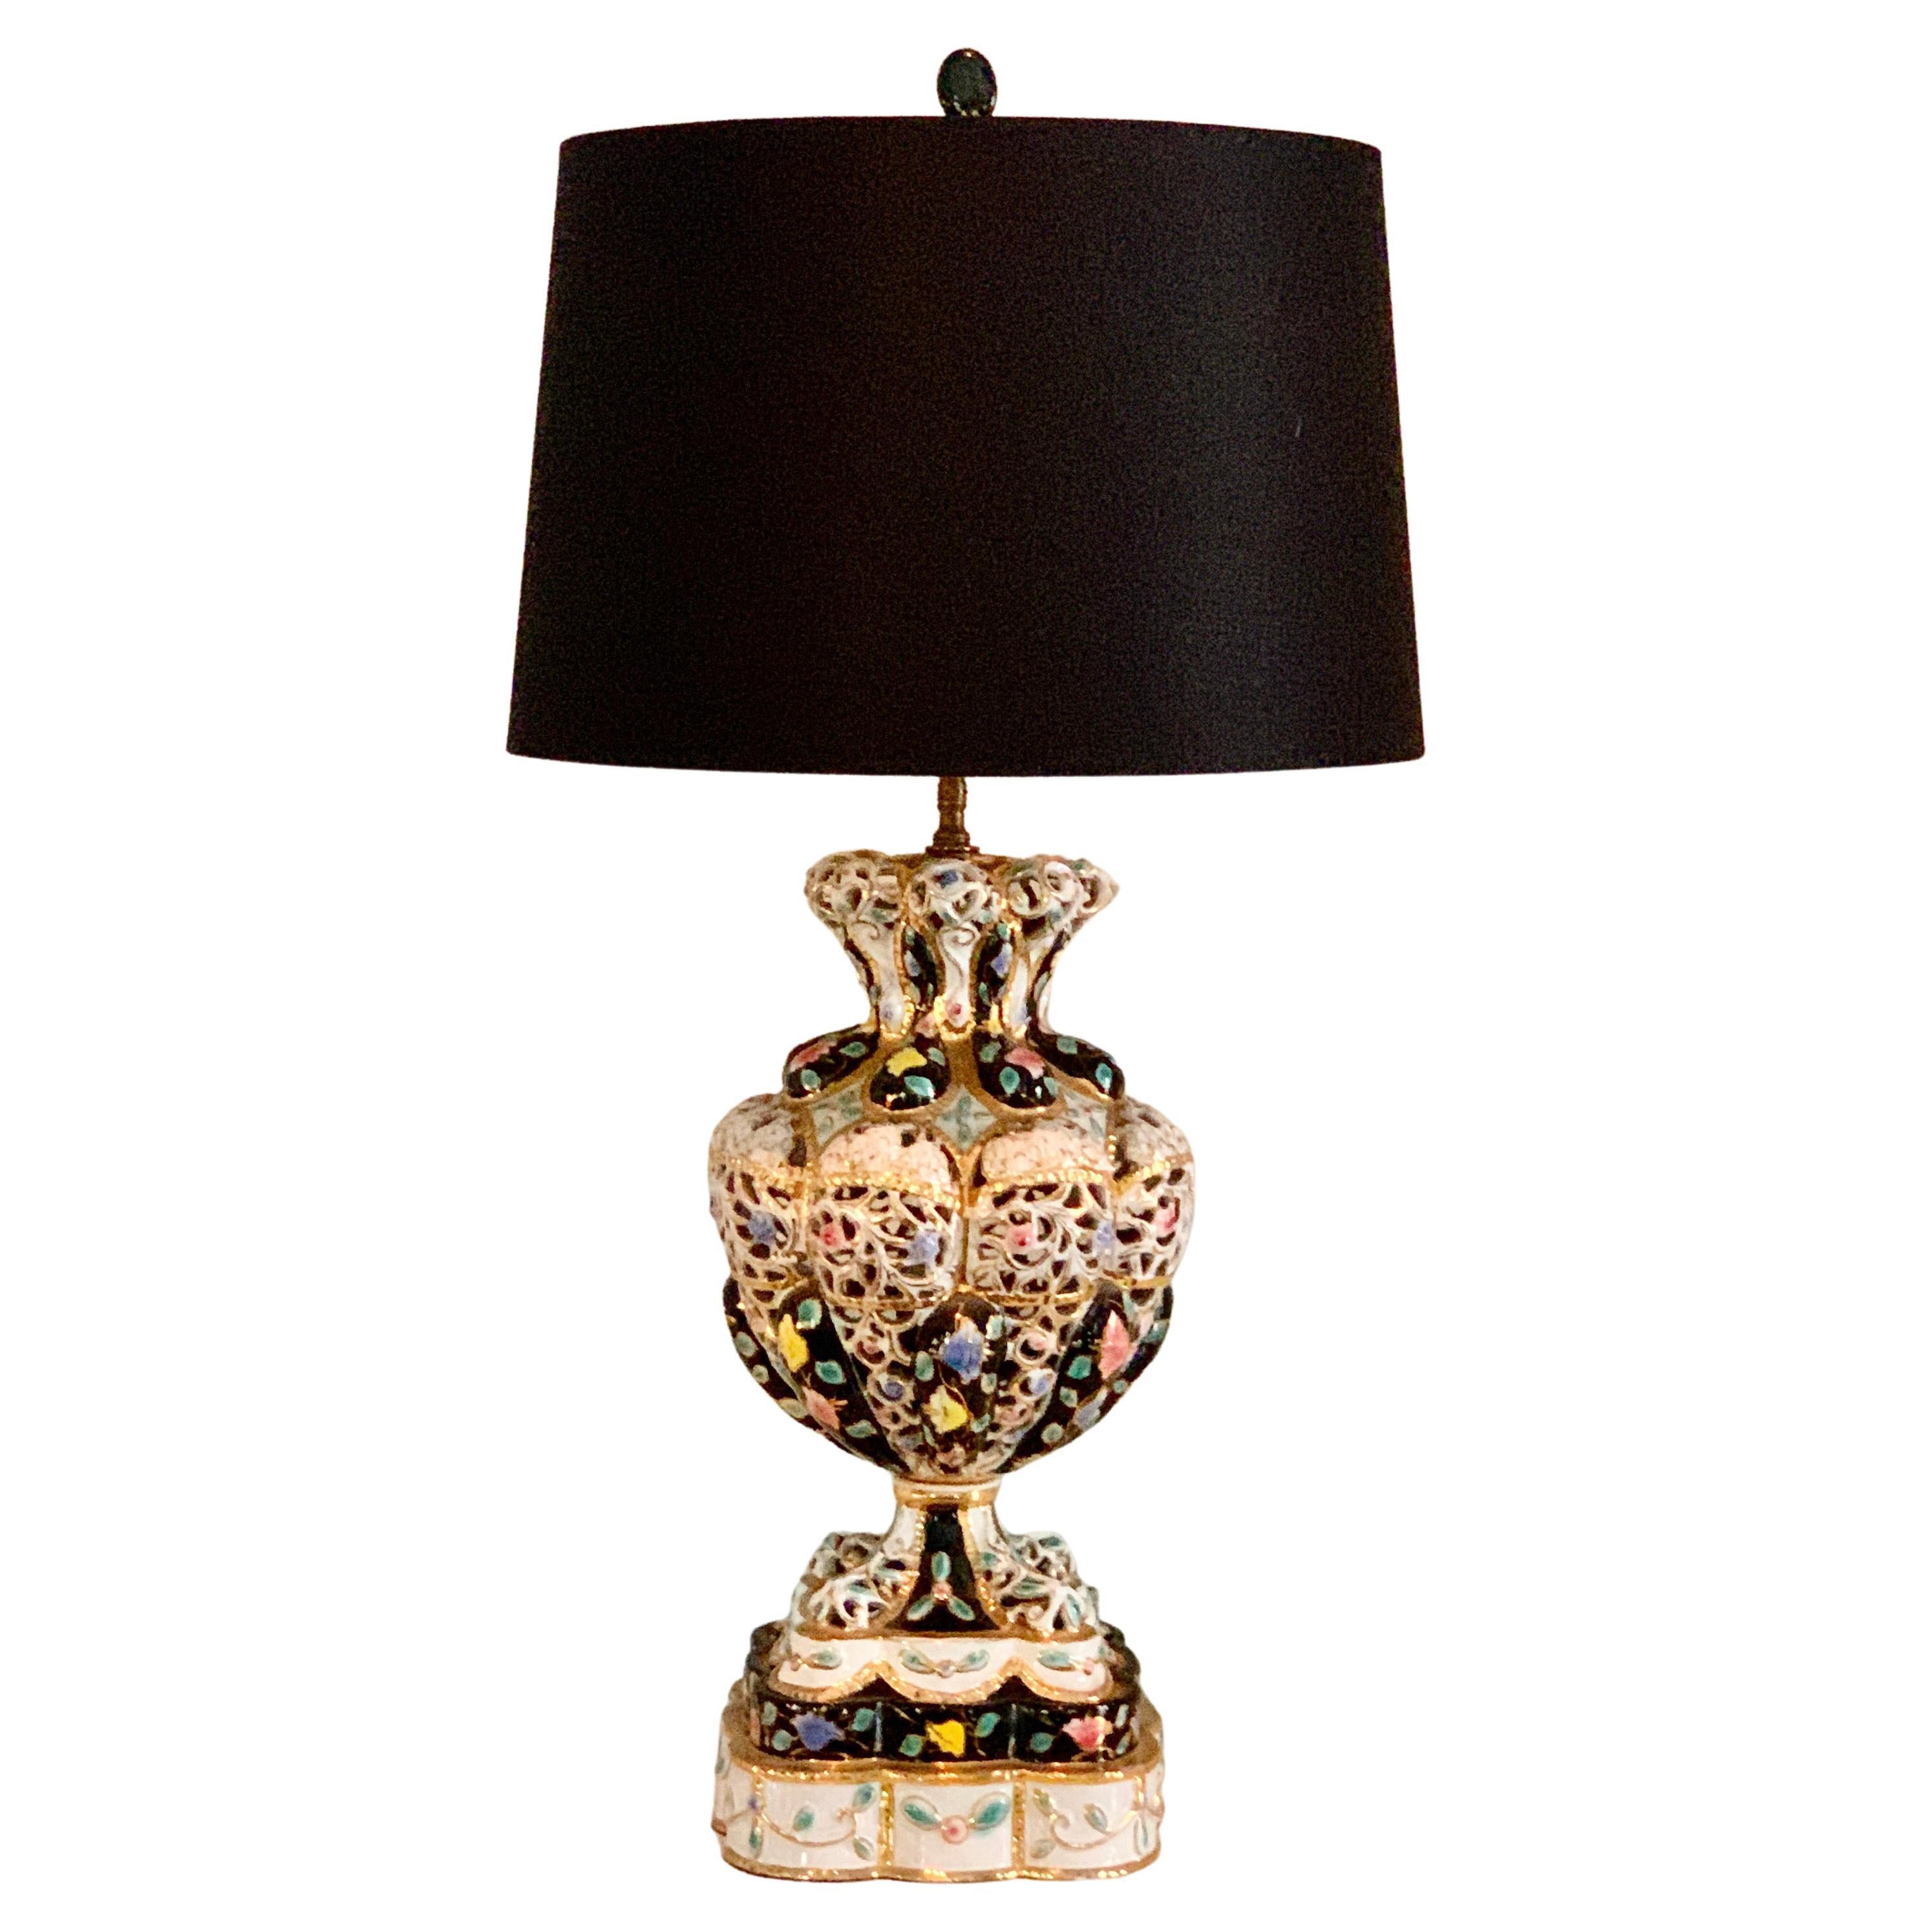 Italian Porcelain Lamp in the Style of Capodimonte